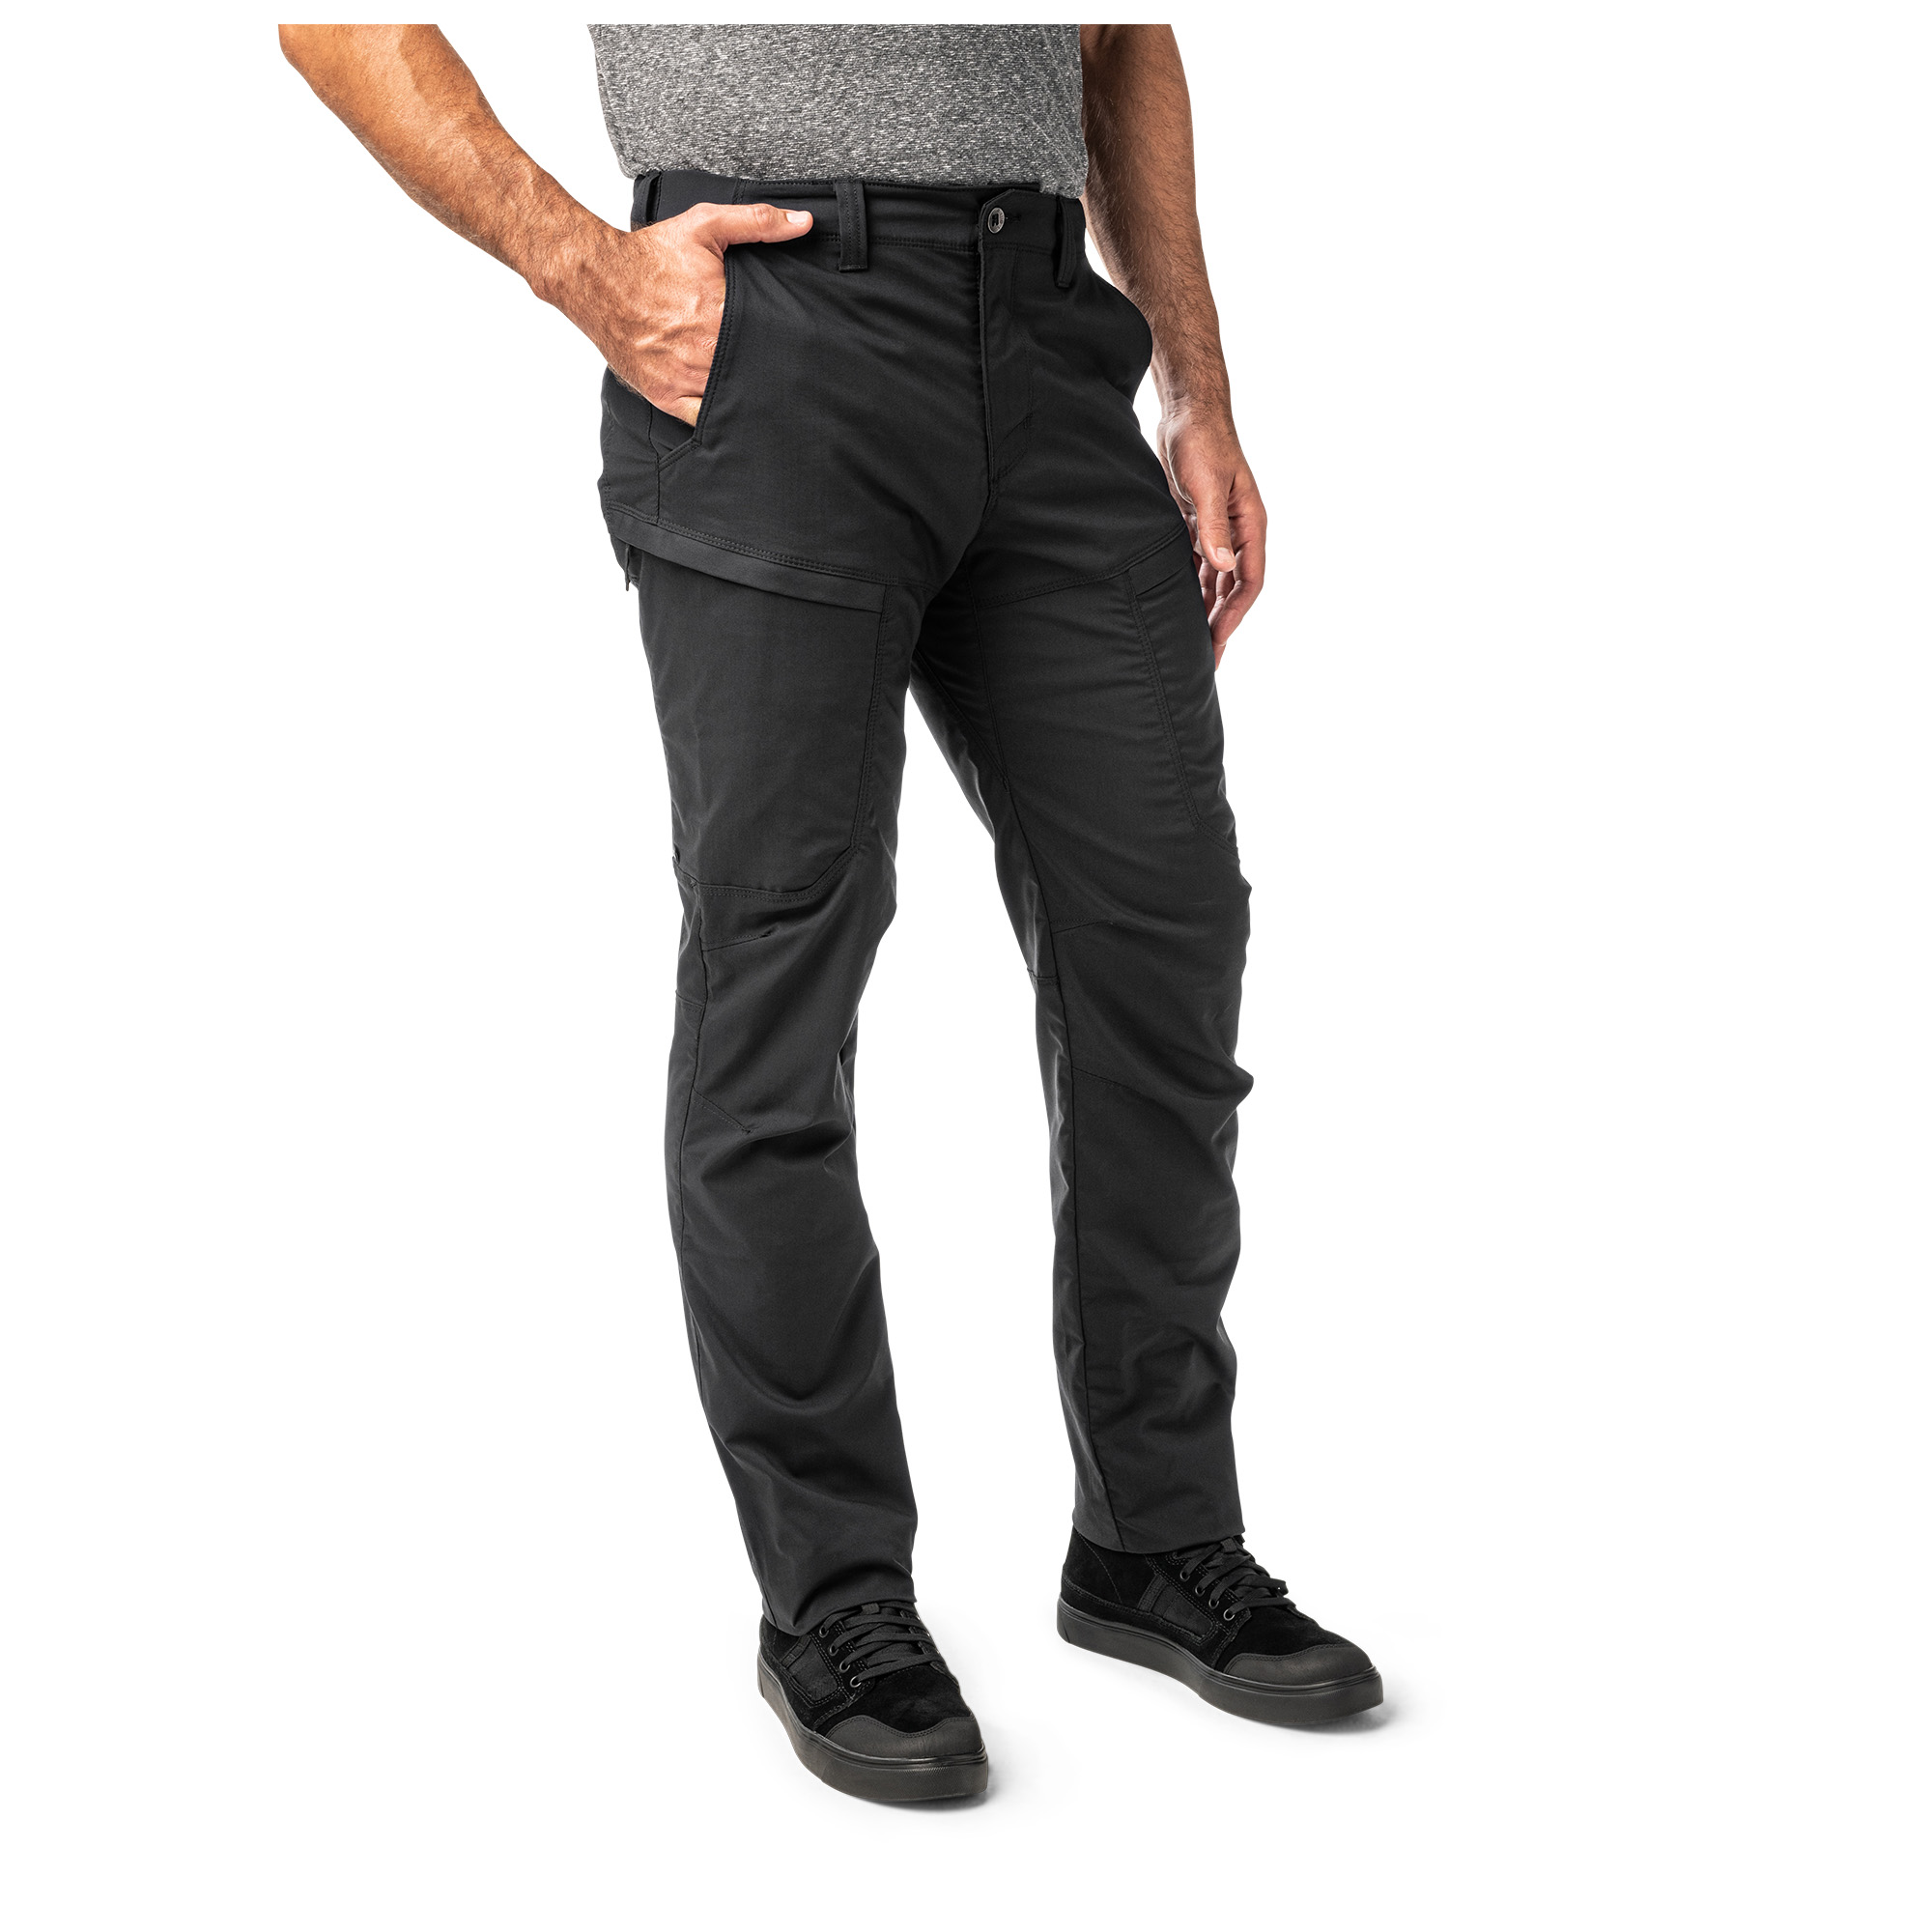 5.11 Tactical - Introducing the Ridge Pant, new for 2021.